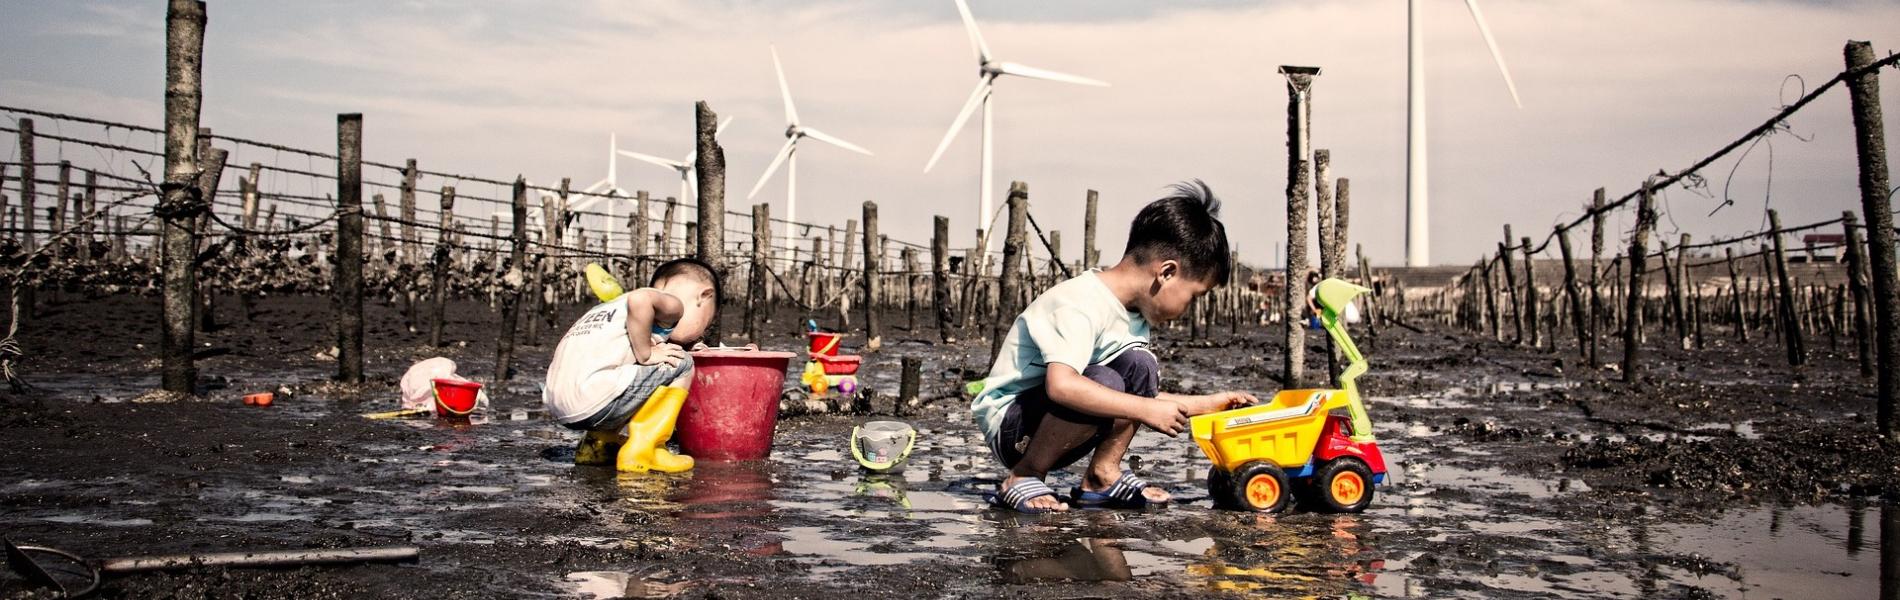 kids playing in the mud in front of wind turbines